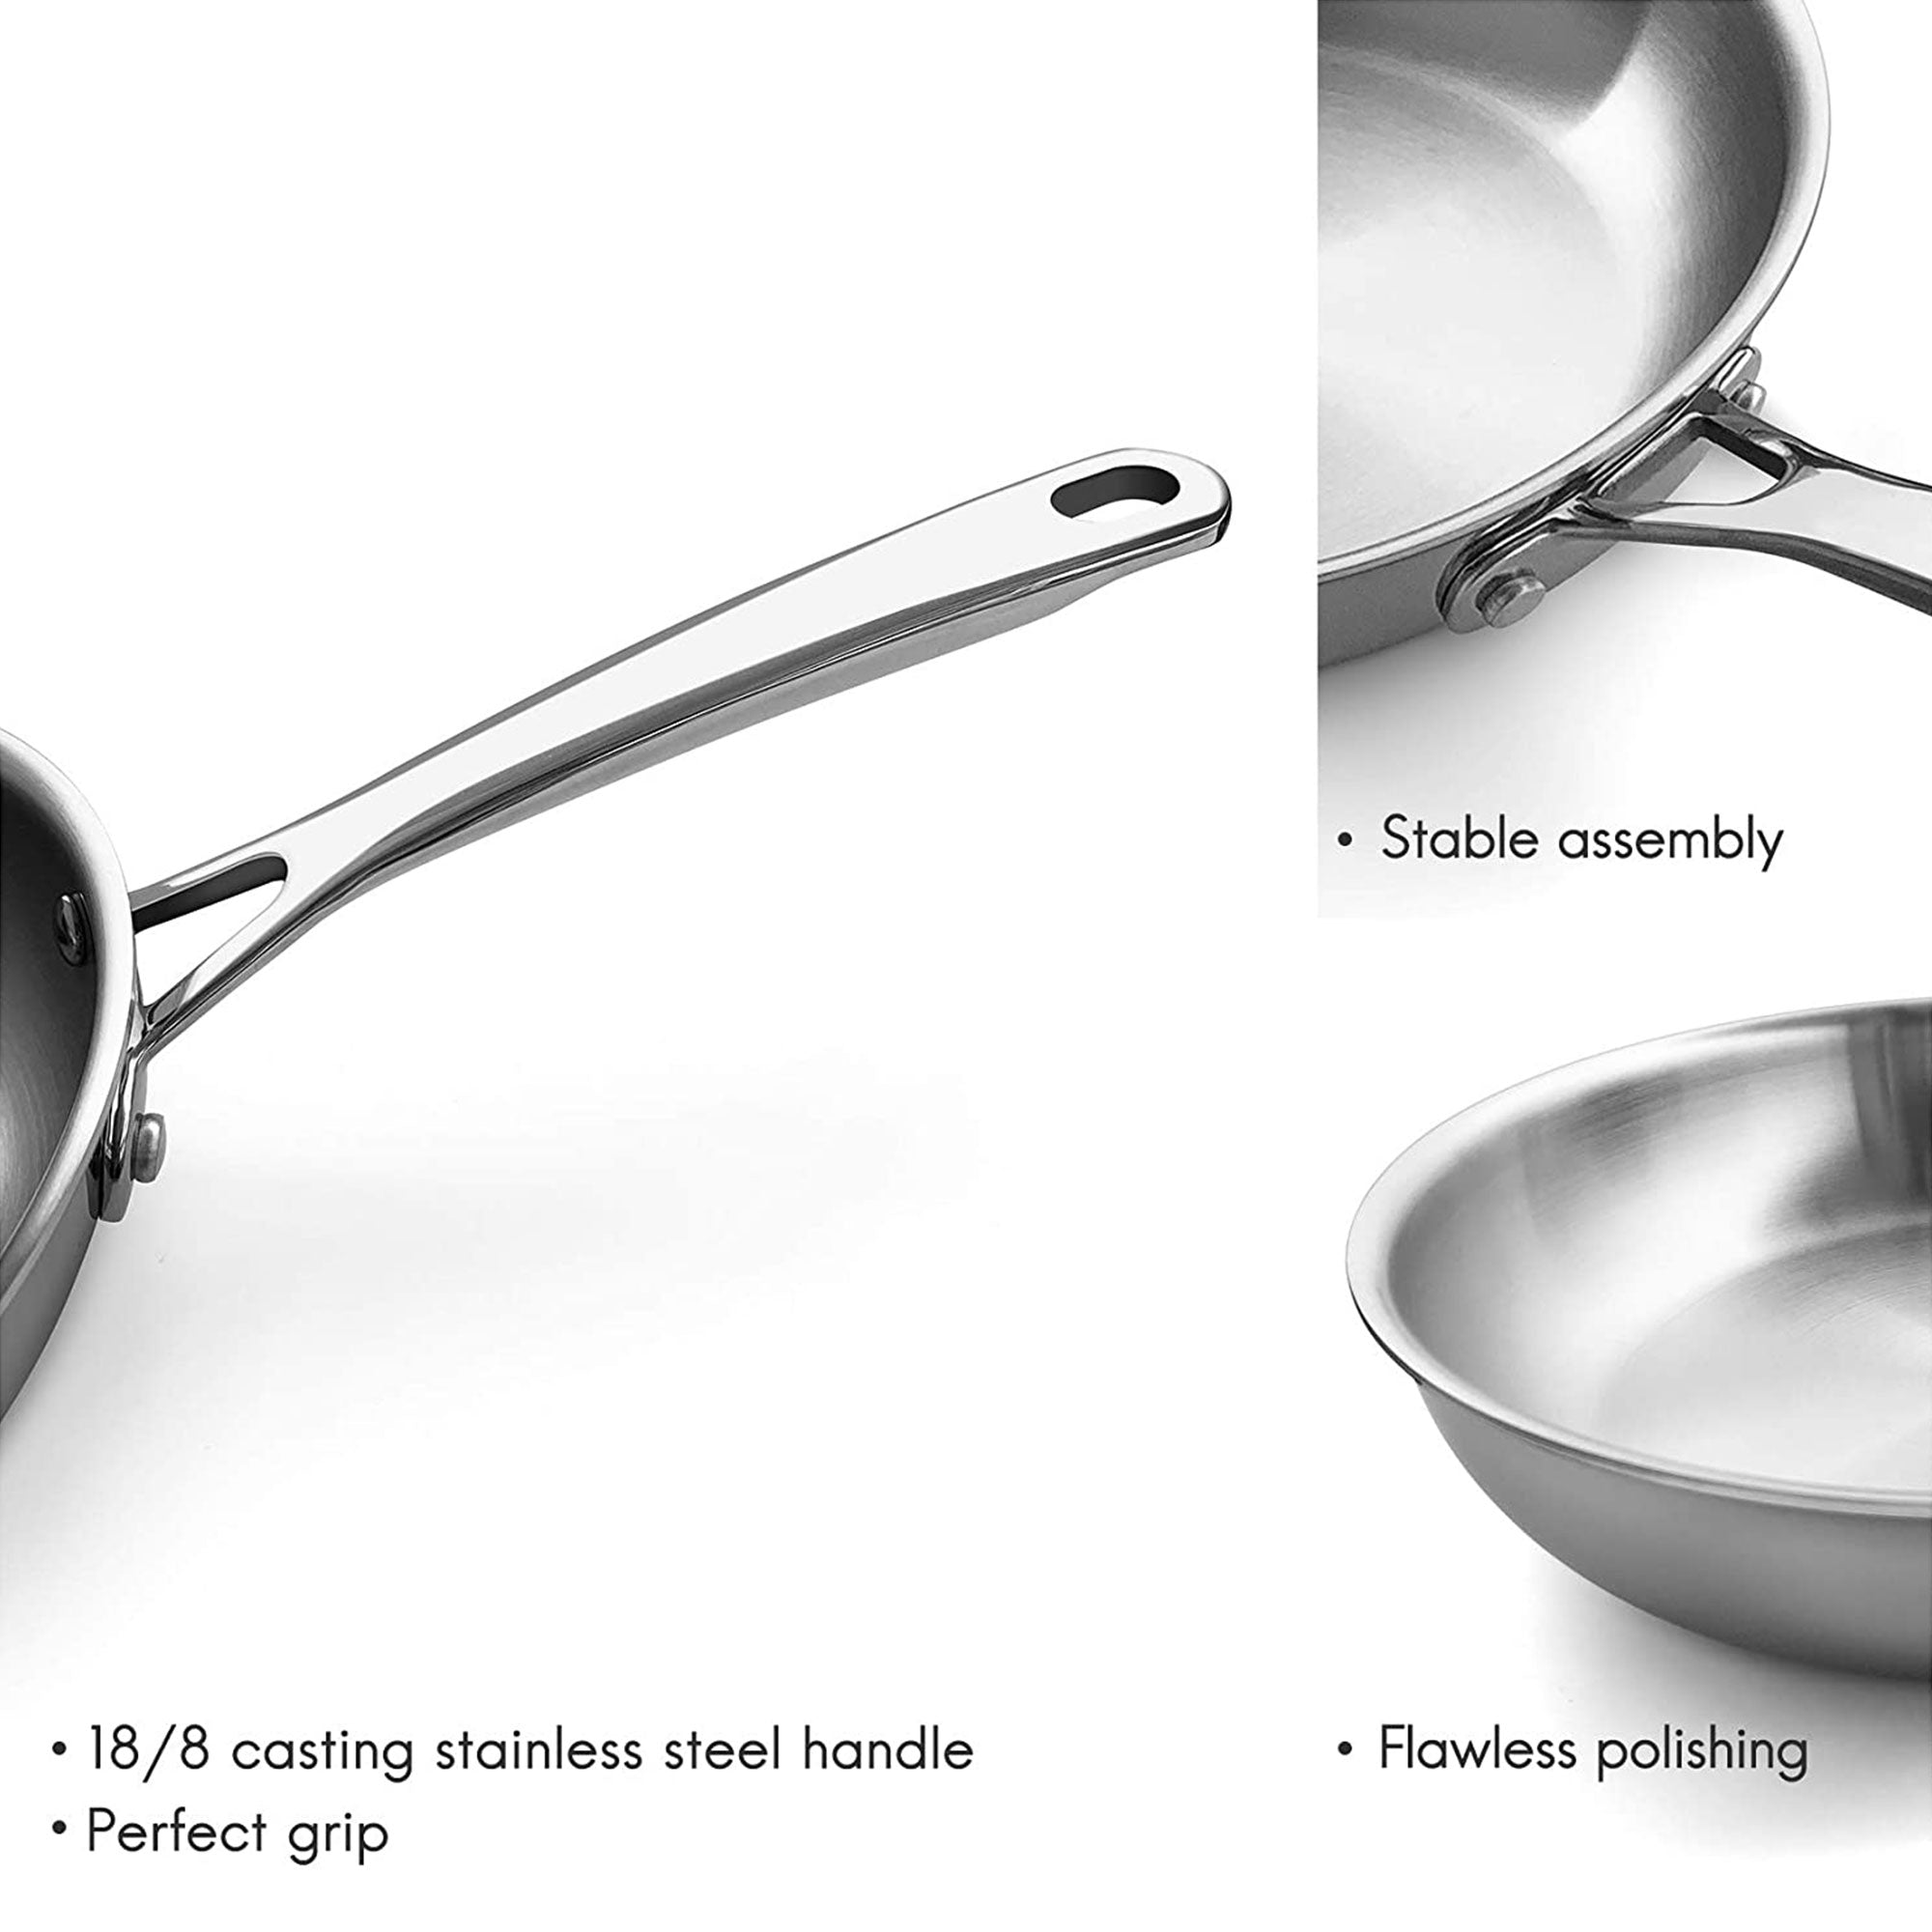 Stainless Steel Pan, 8, 10, or 12 inch